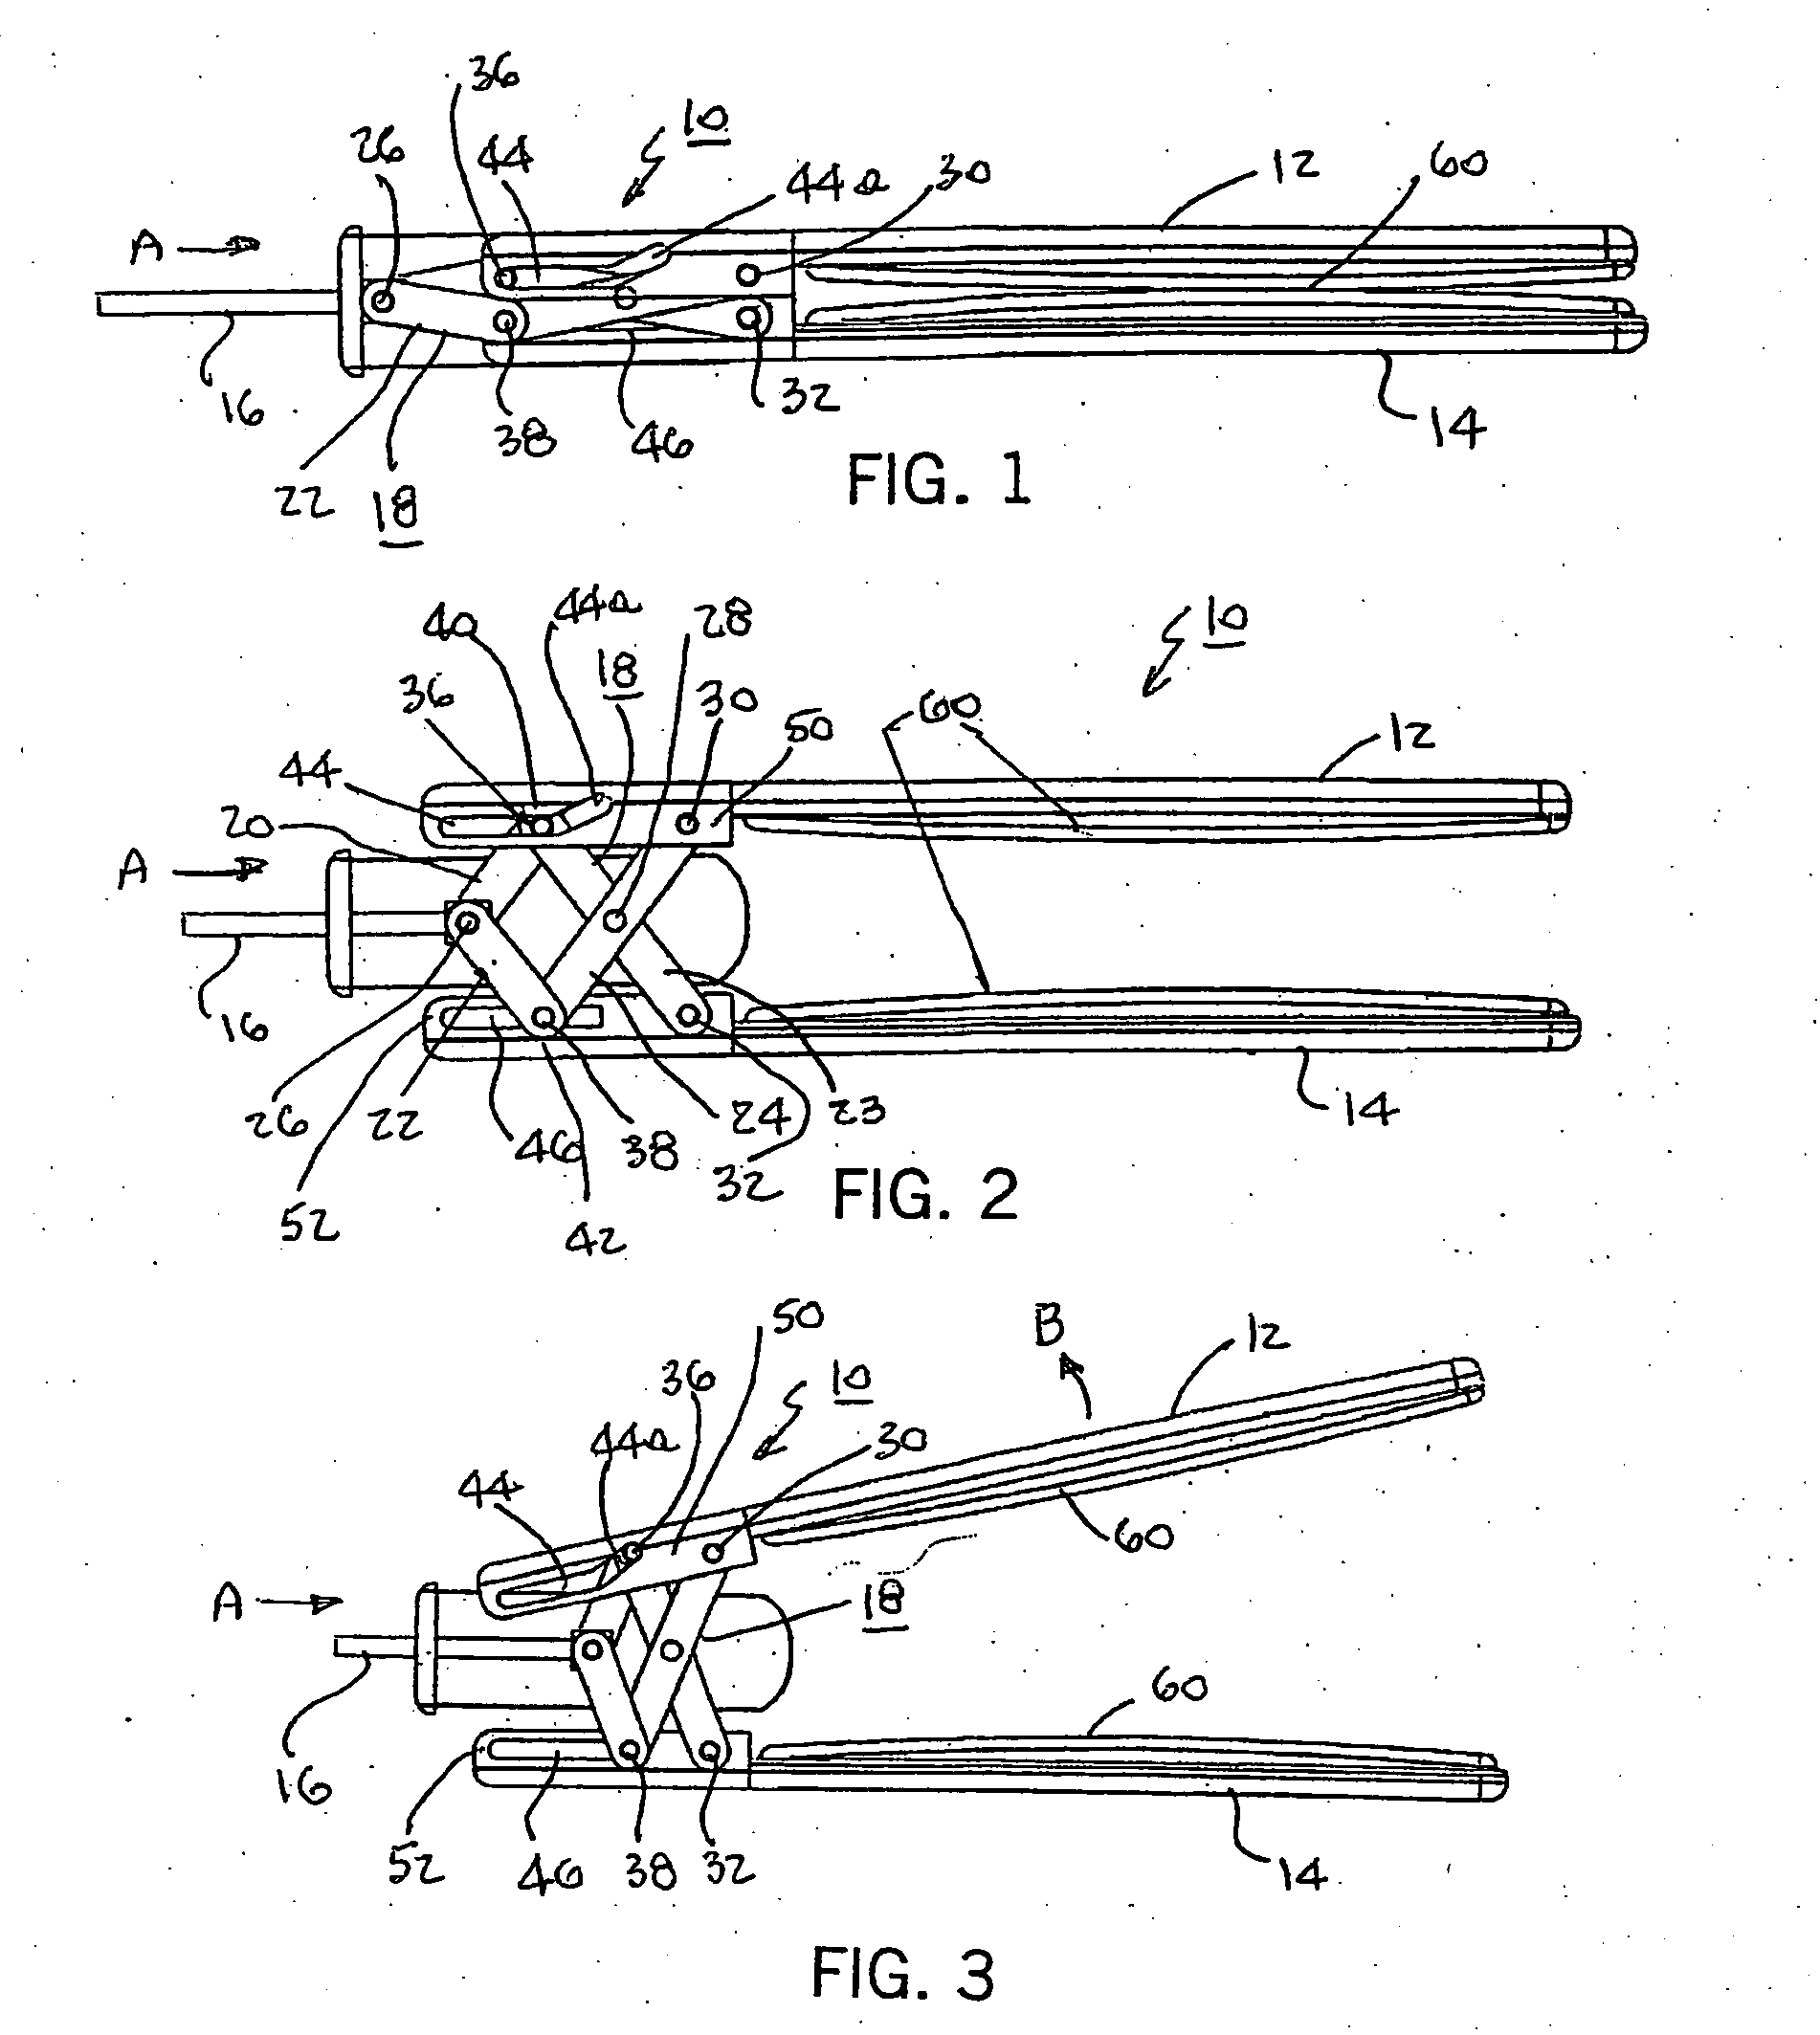 Surgical clamp possessing a combined parallel and scissor style clamp head